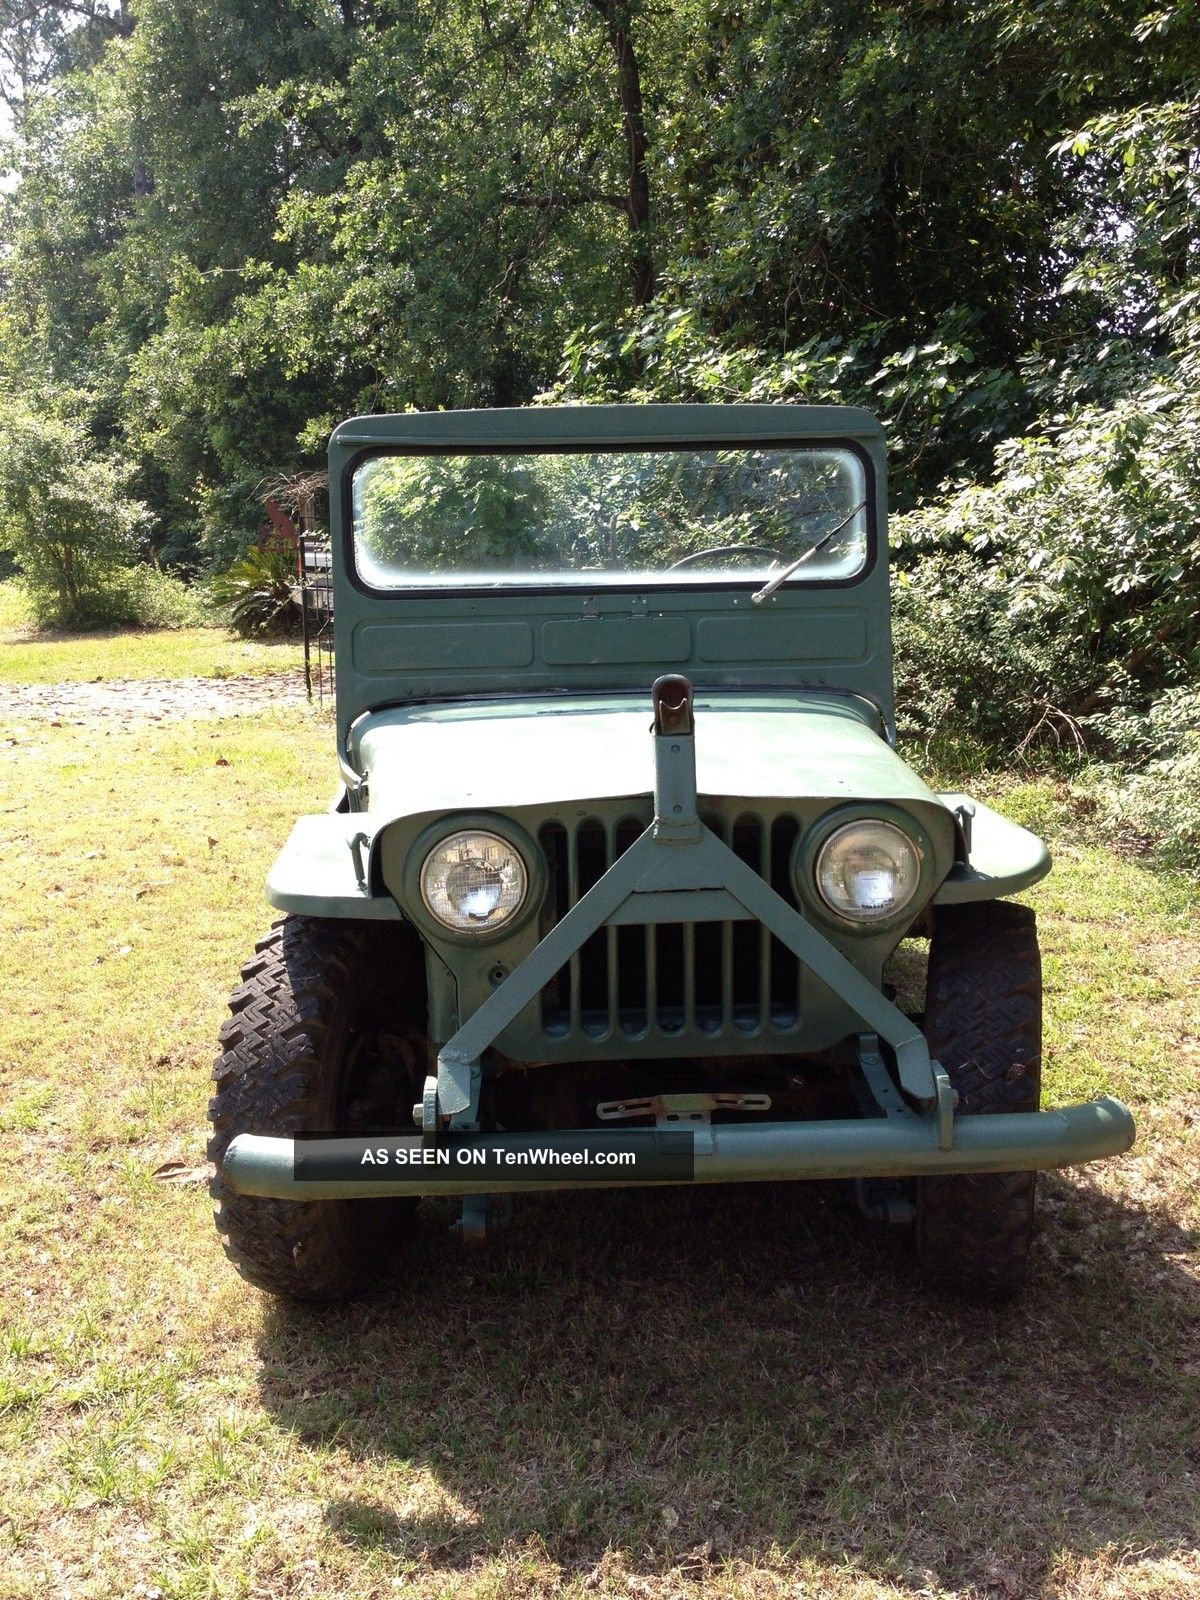 1952 Willys Overland Jeep - Serial 175853 Model - Cj2a Willys photo